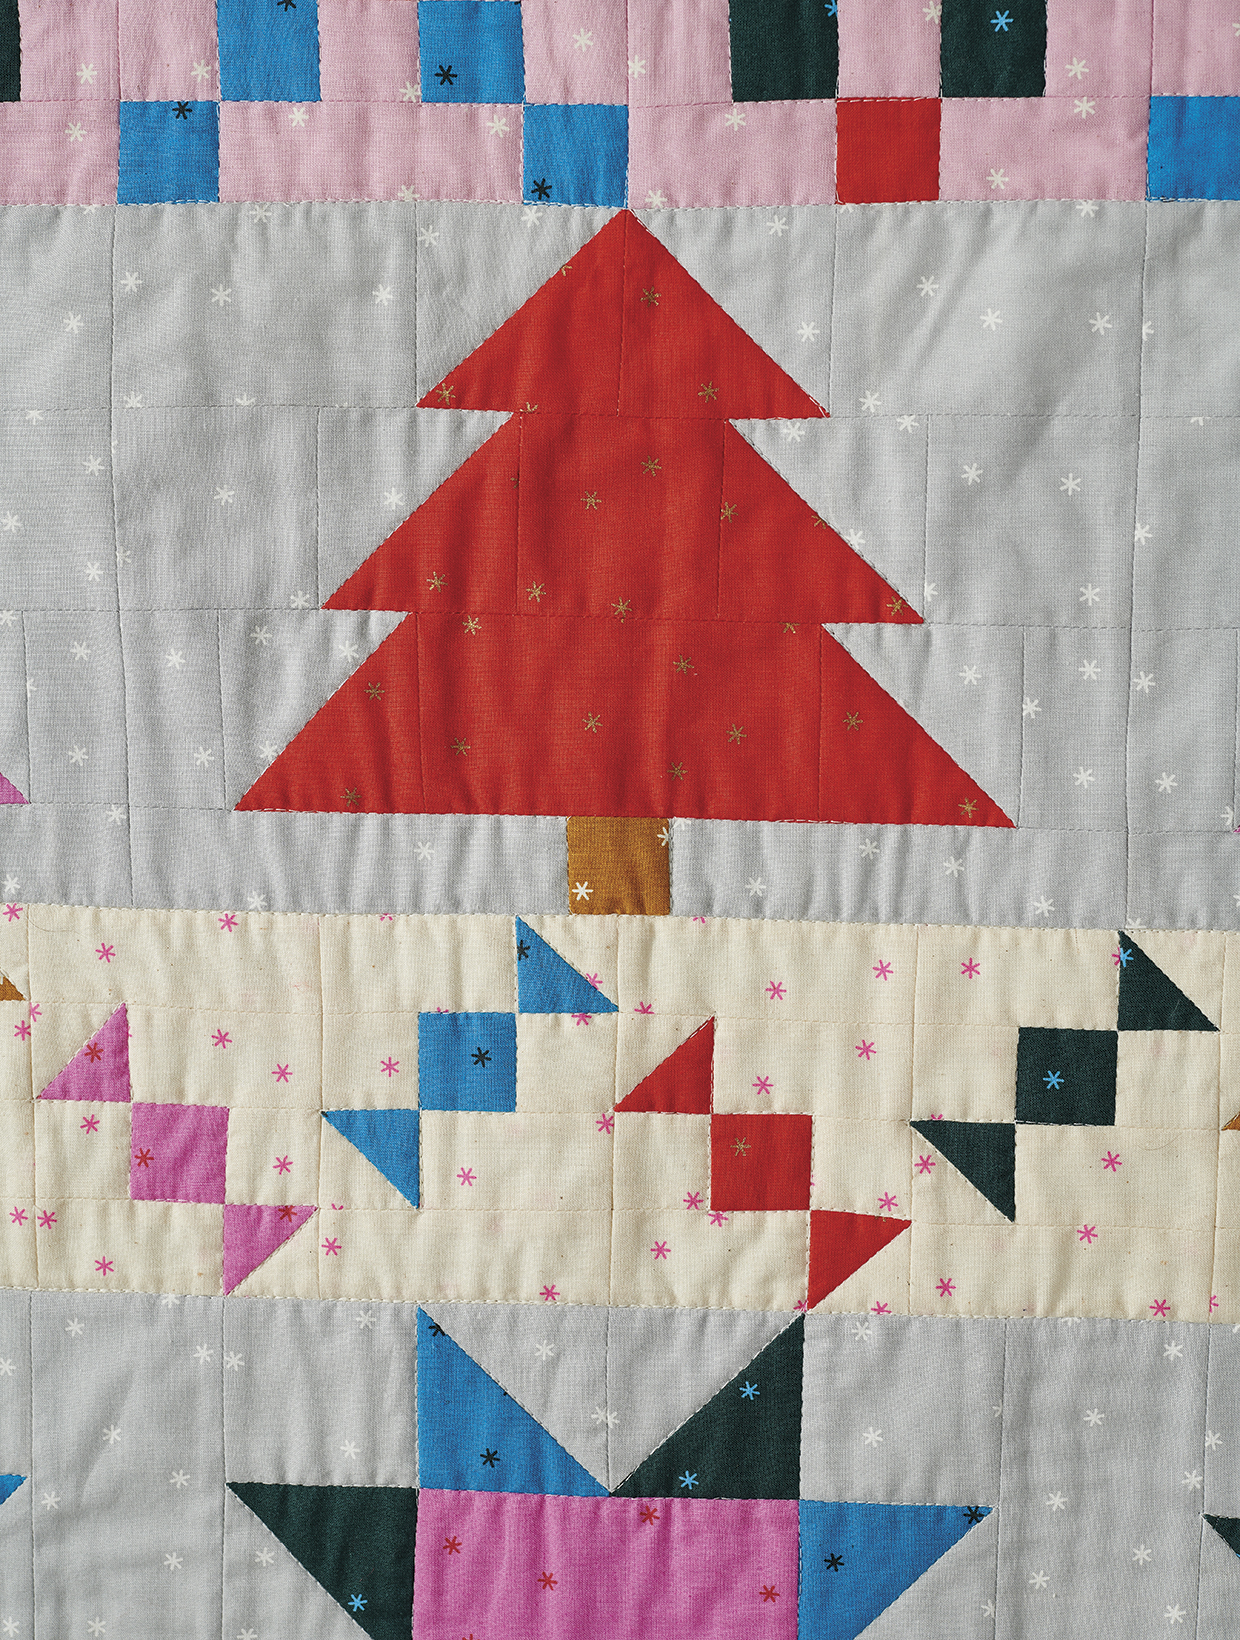 How to make a Christmas quilt